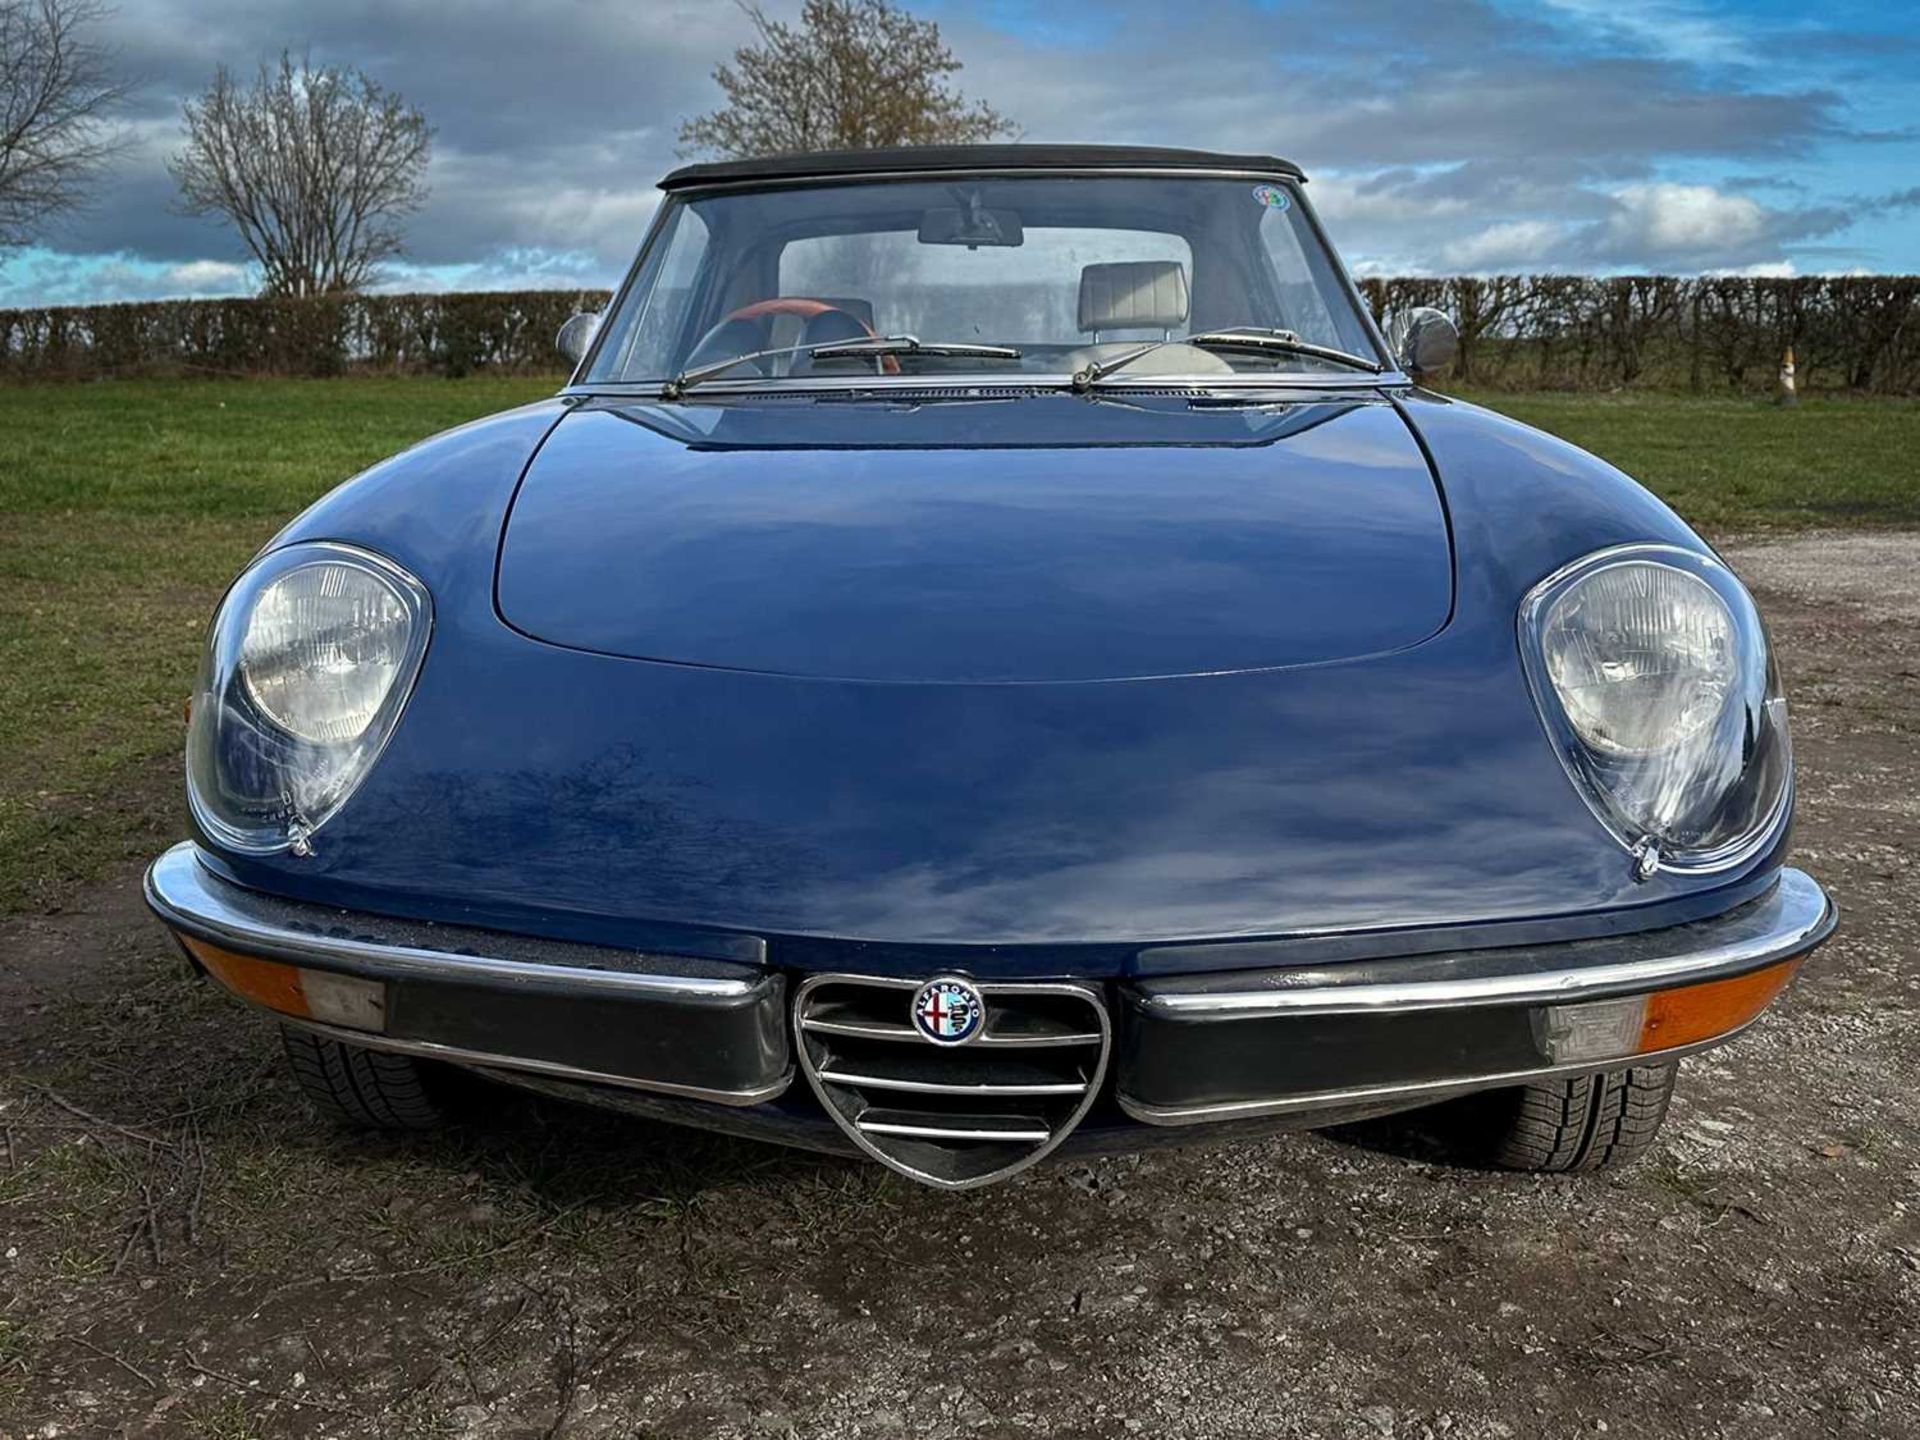 1972 Alfa Romeo 2000 Spider Veloce By Bell & Colvill - Image 11 of 70